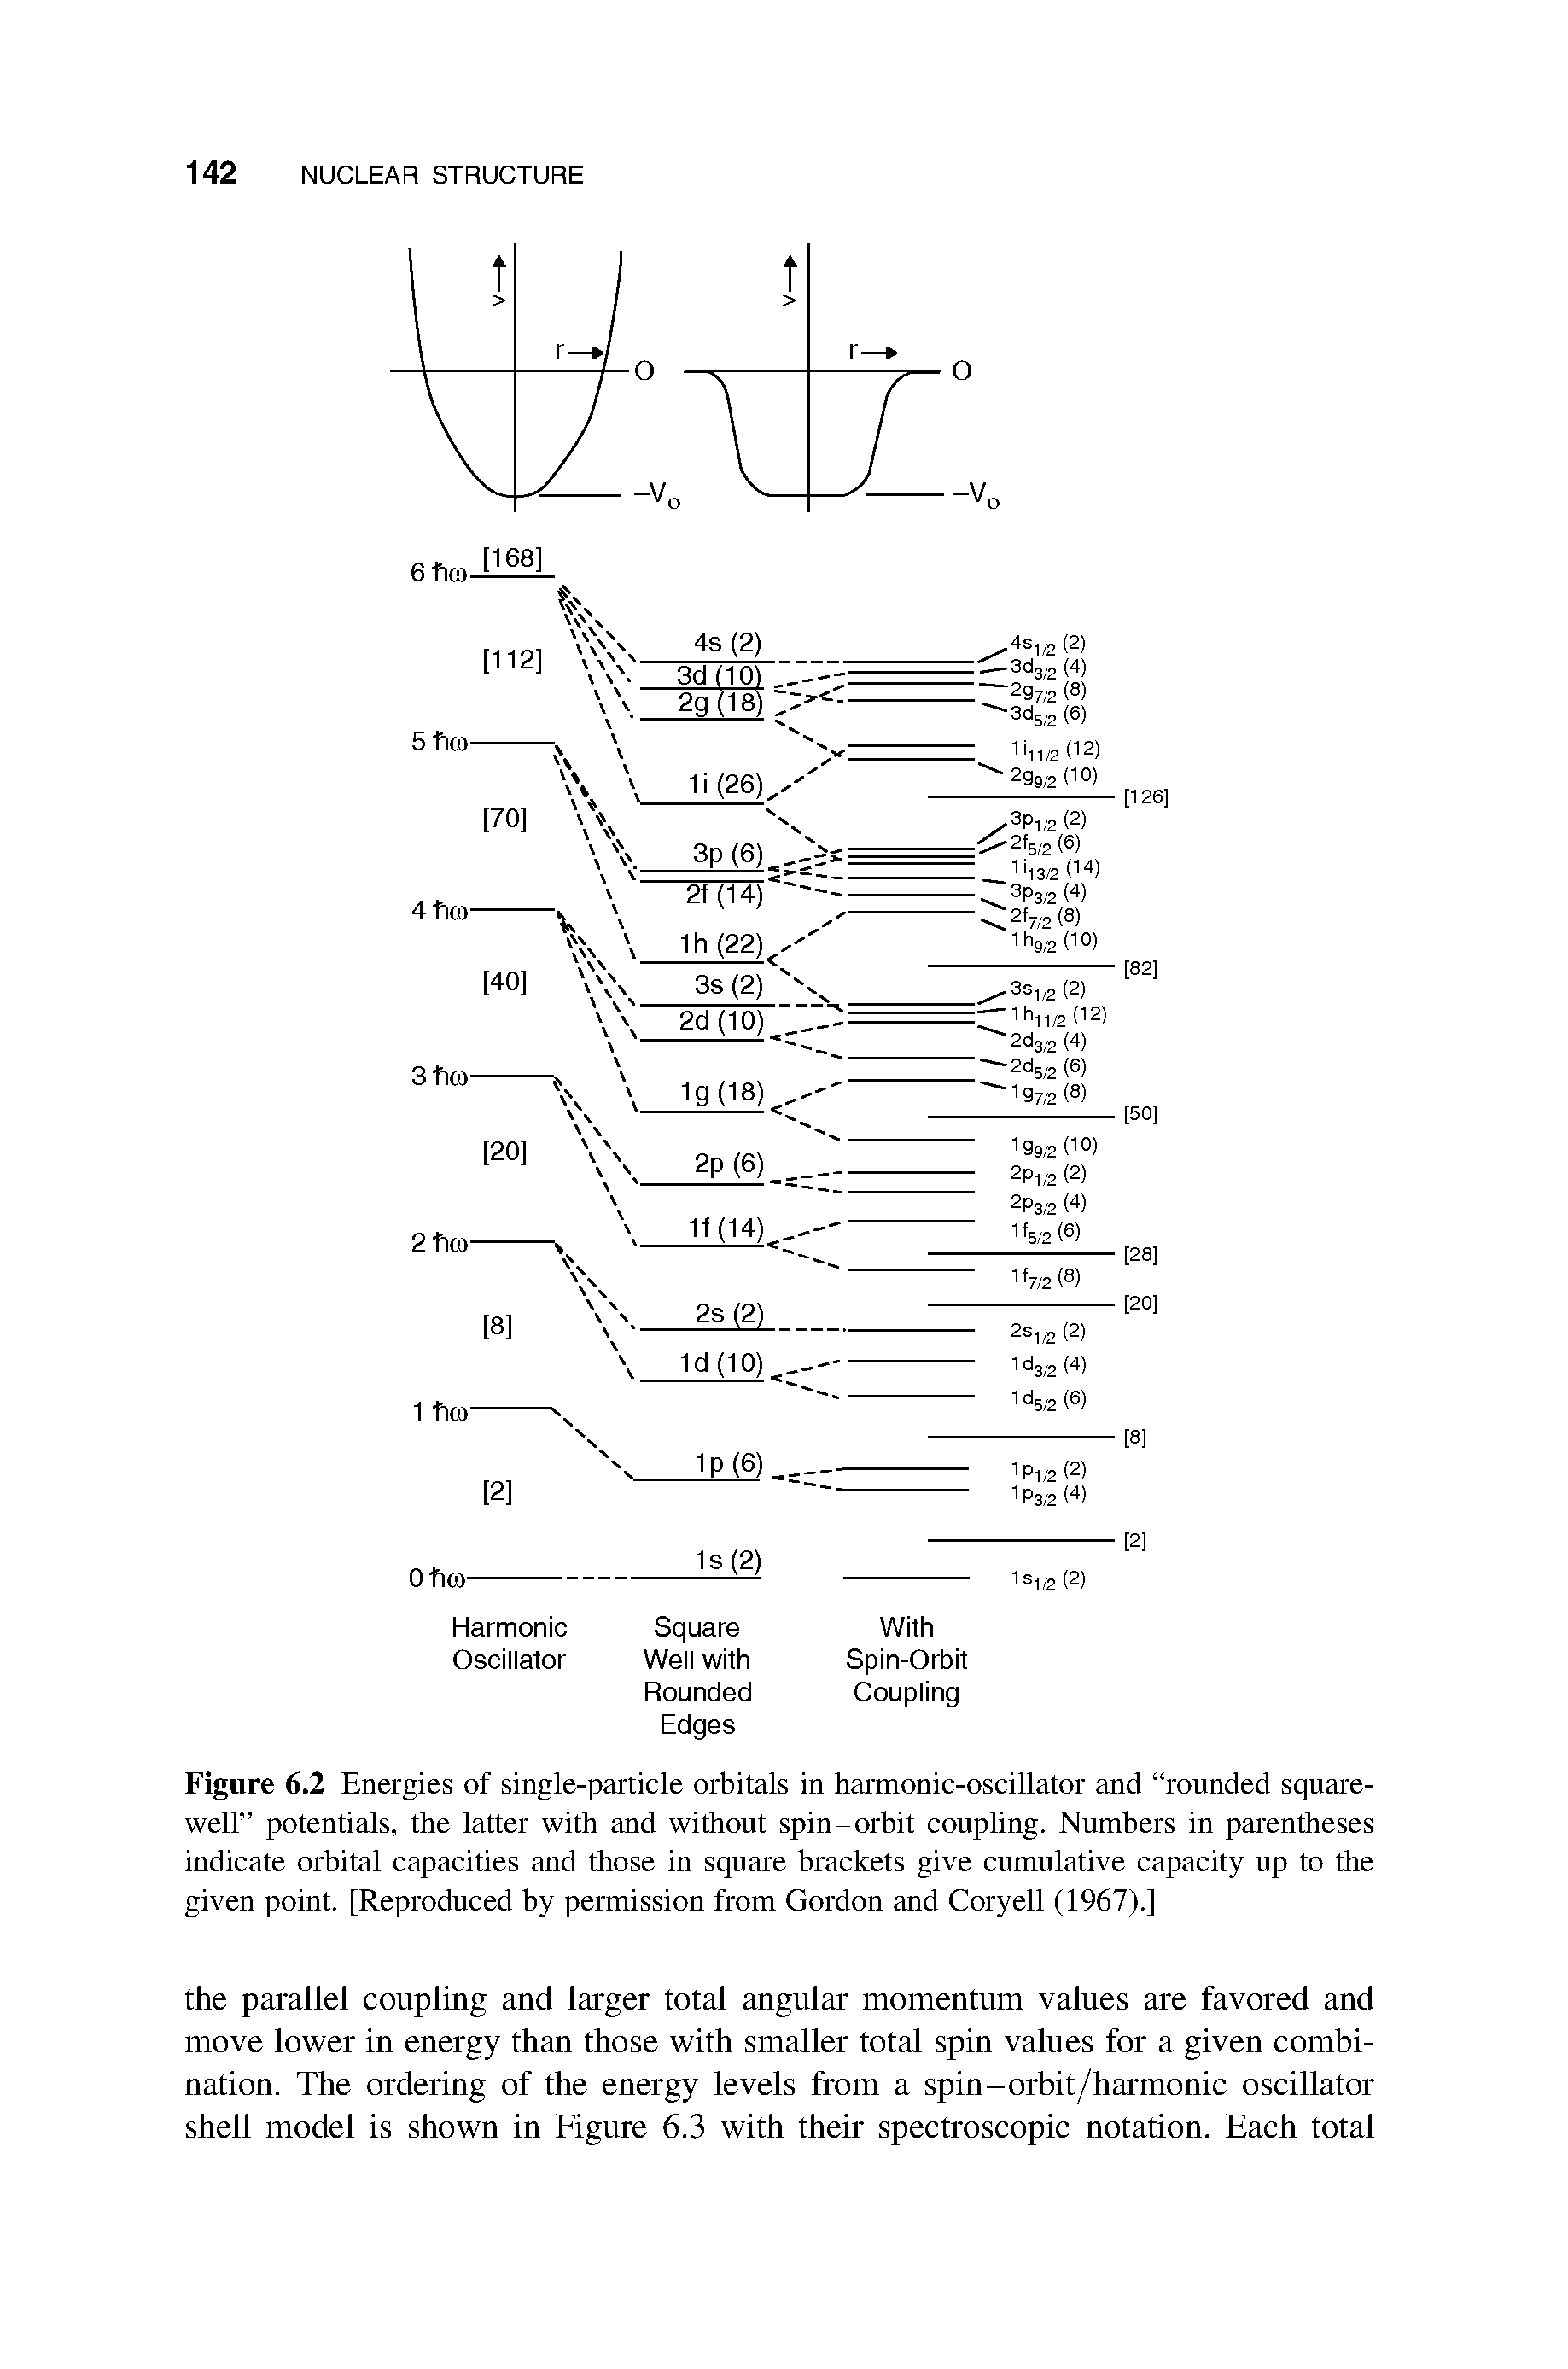 Figure 6.2 Energies of single-particle orbitals in harmonic-oscillator and rounded square-well potentials, the latter with and without spin-orbit coupling. Numbers in parentheses indicate orbital capacities and those in square brackets give cumulative capacity up to the given point. [Reproduced by permission from Gordon and Coryell (1967).]...